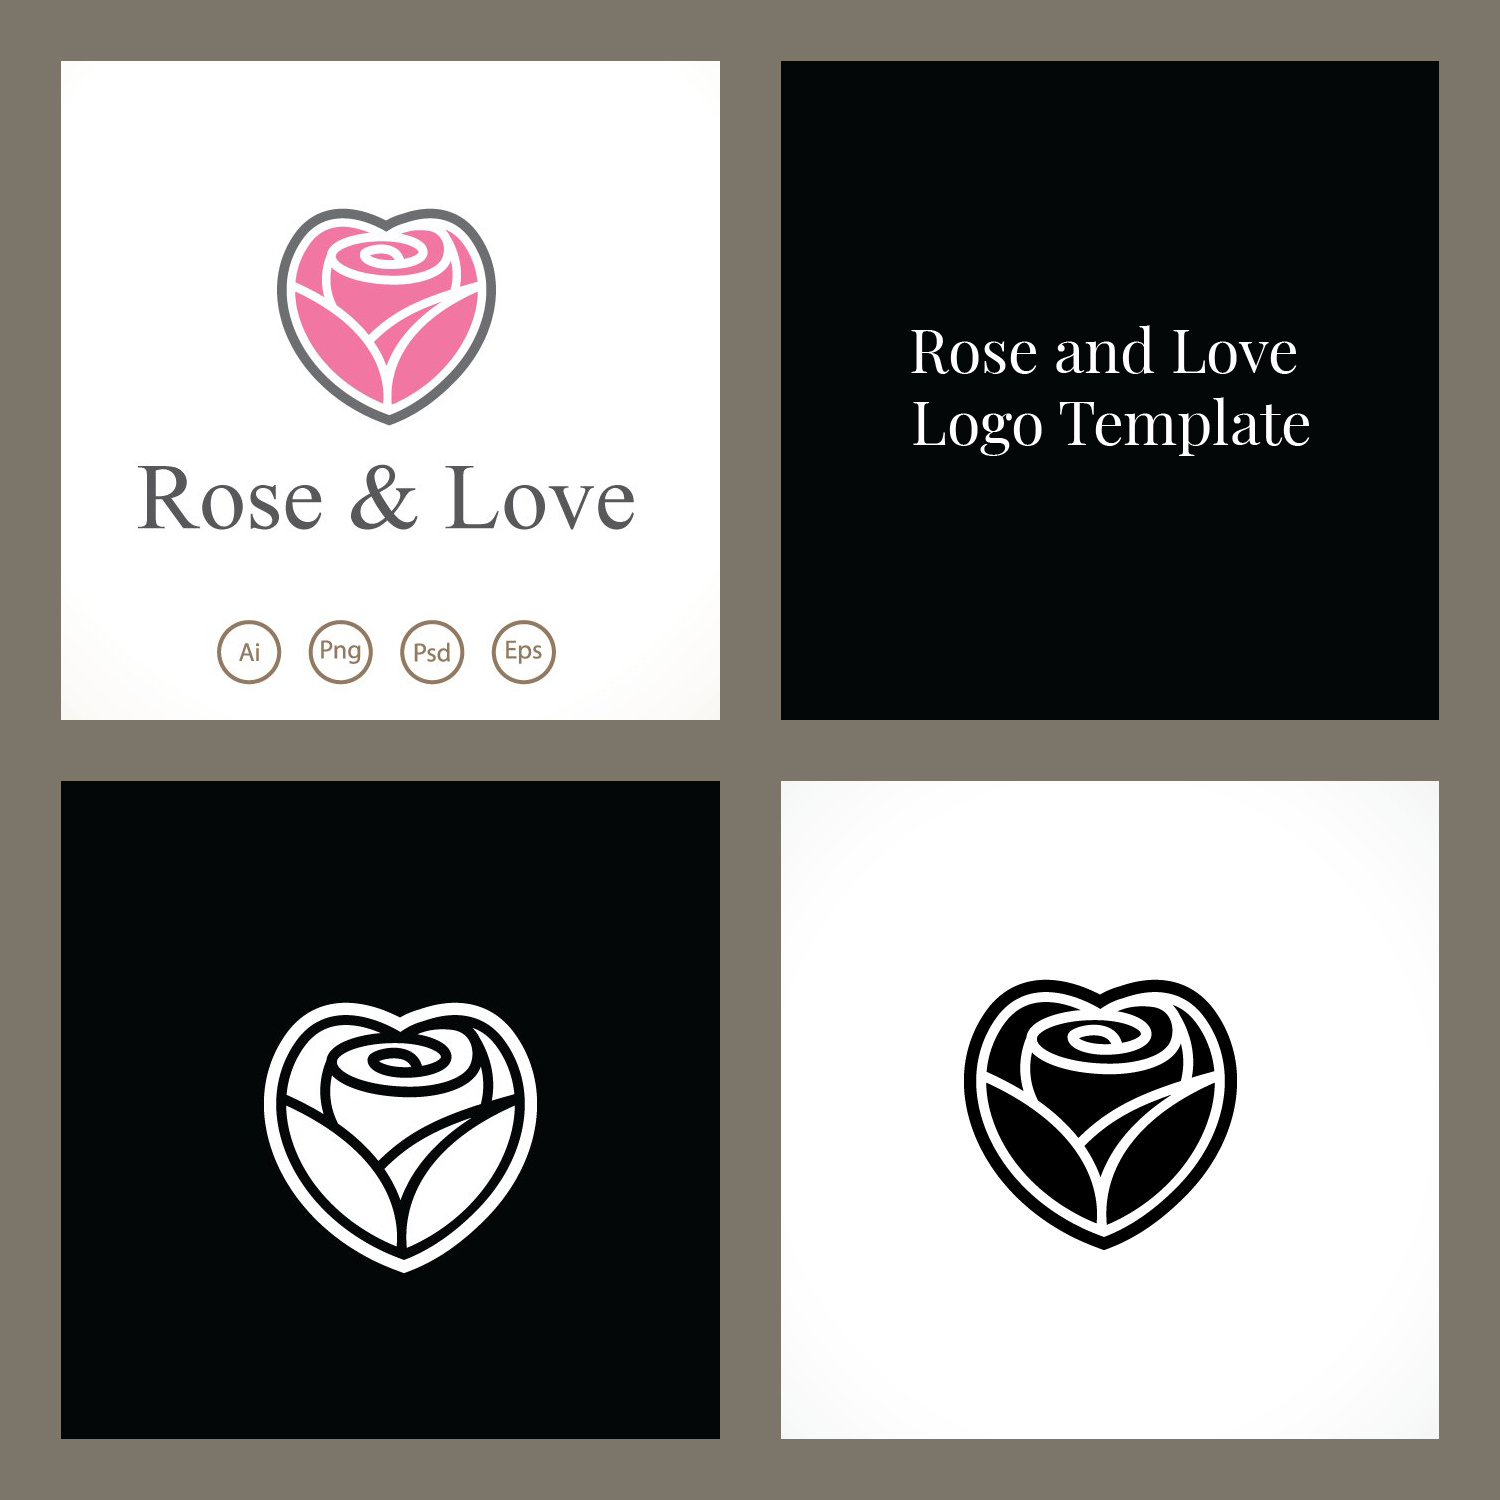 Rose and love logo template preview.